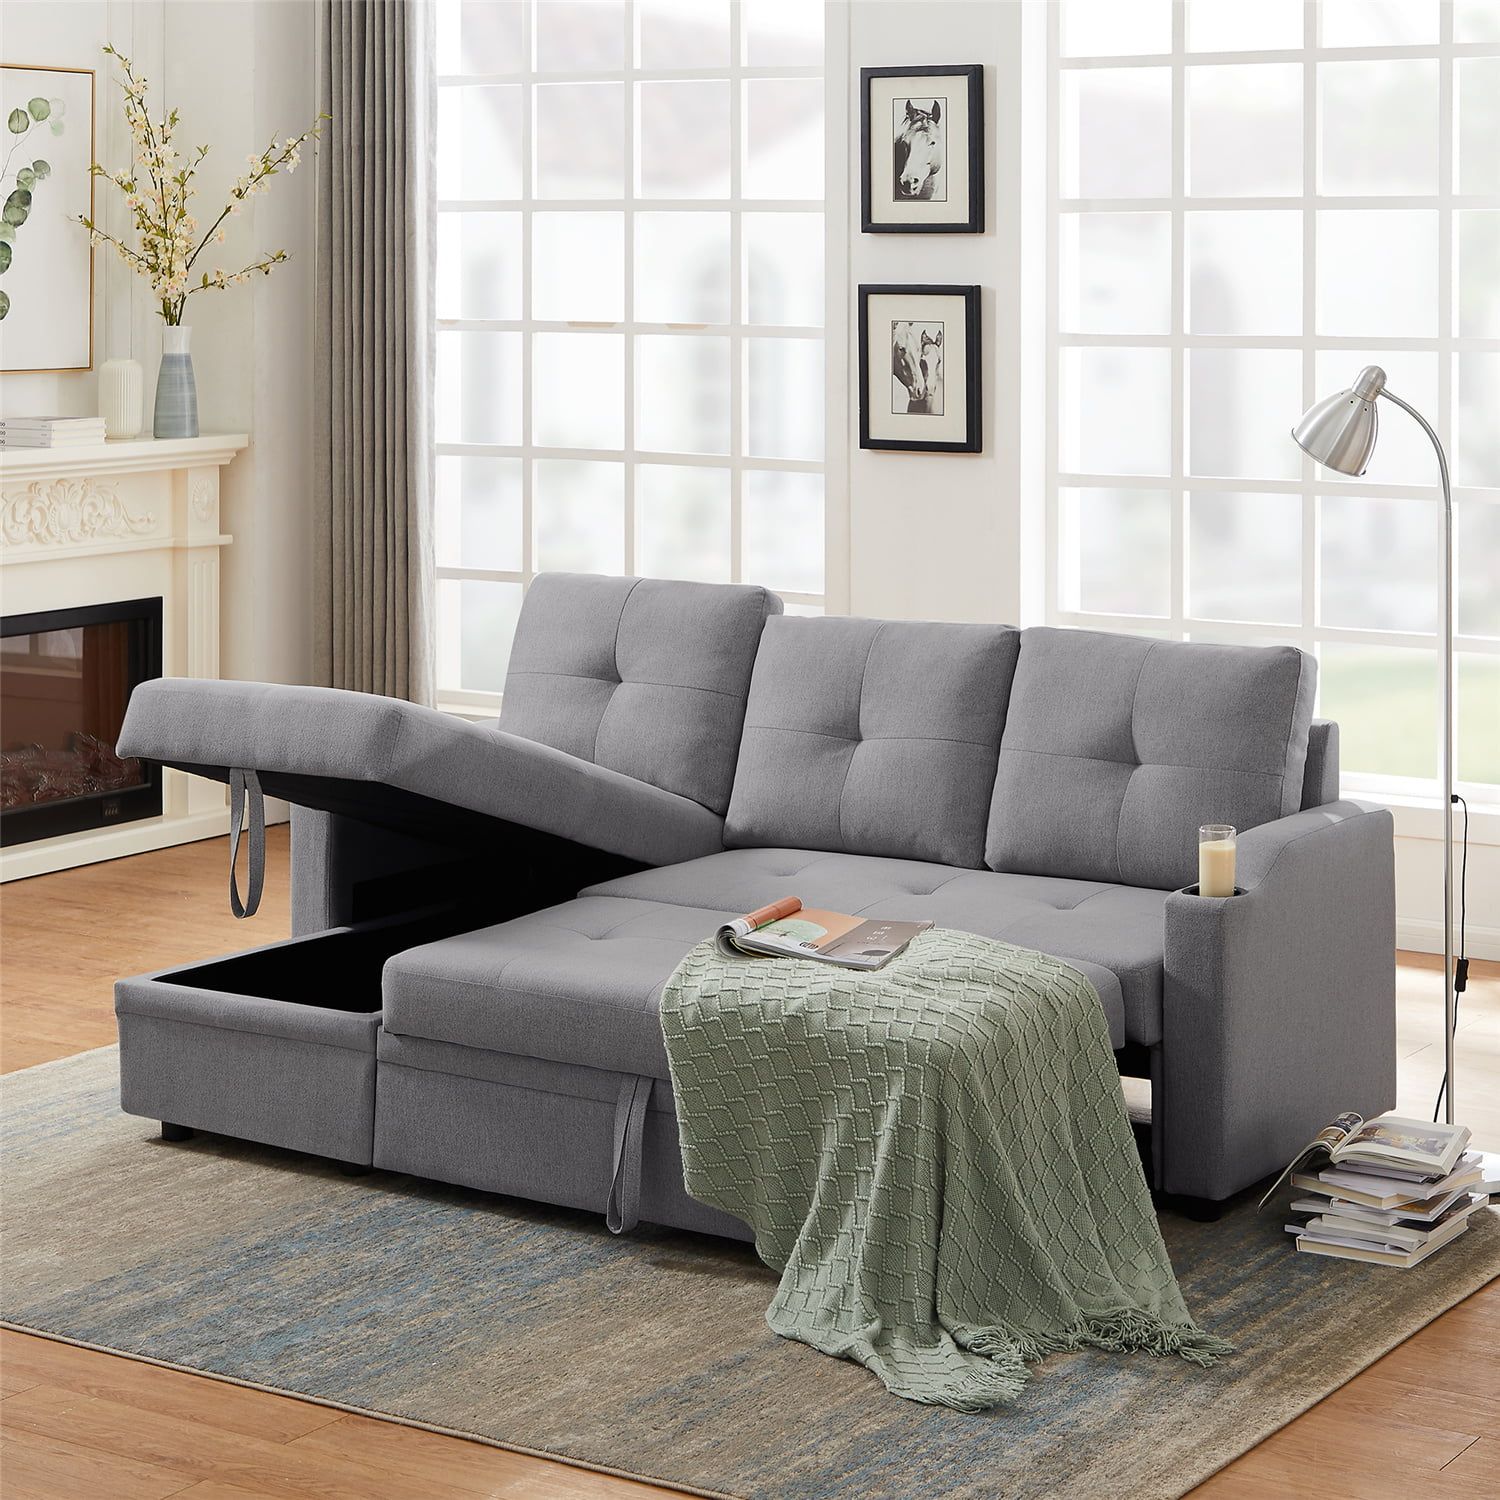 81" Sleeper Sectional Sofa Couch With Pull Out Sleeper And Reversible  Storage Chaise Lounge, Convertible Corner Sofa Couch With Two Cup Holders  For Living Room, Gray – Walmart Inside Sectional Sofa With Storage (View 6 of 20)